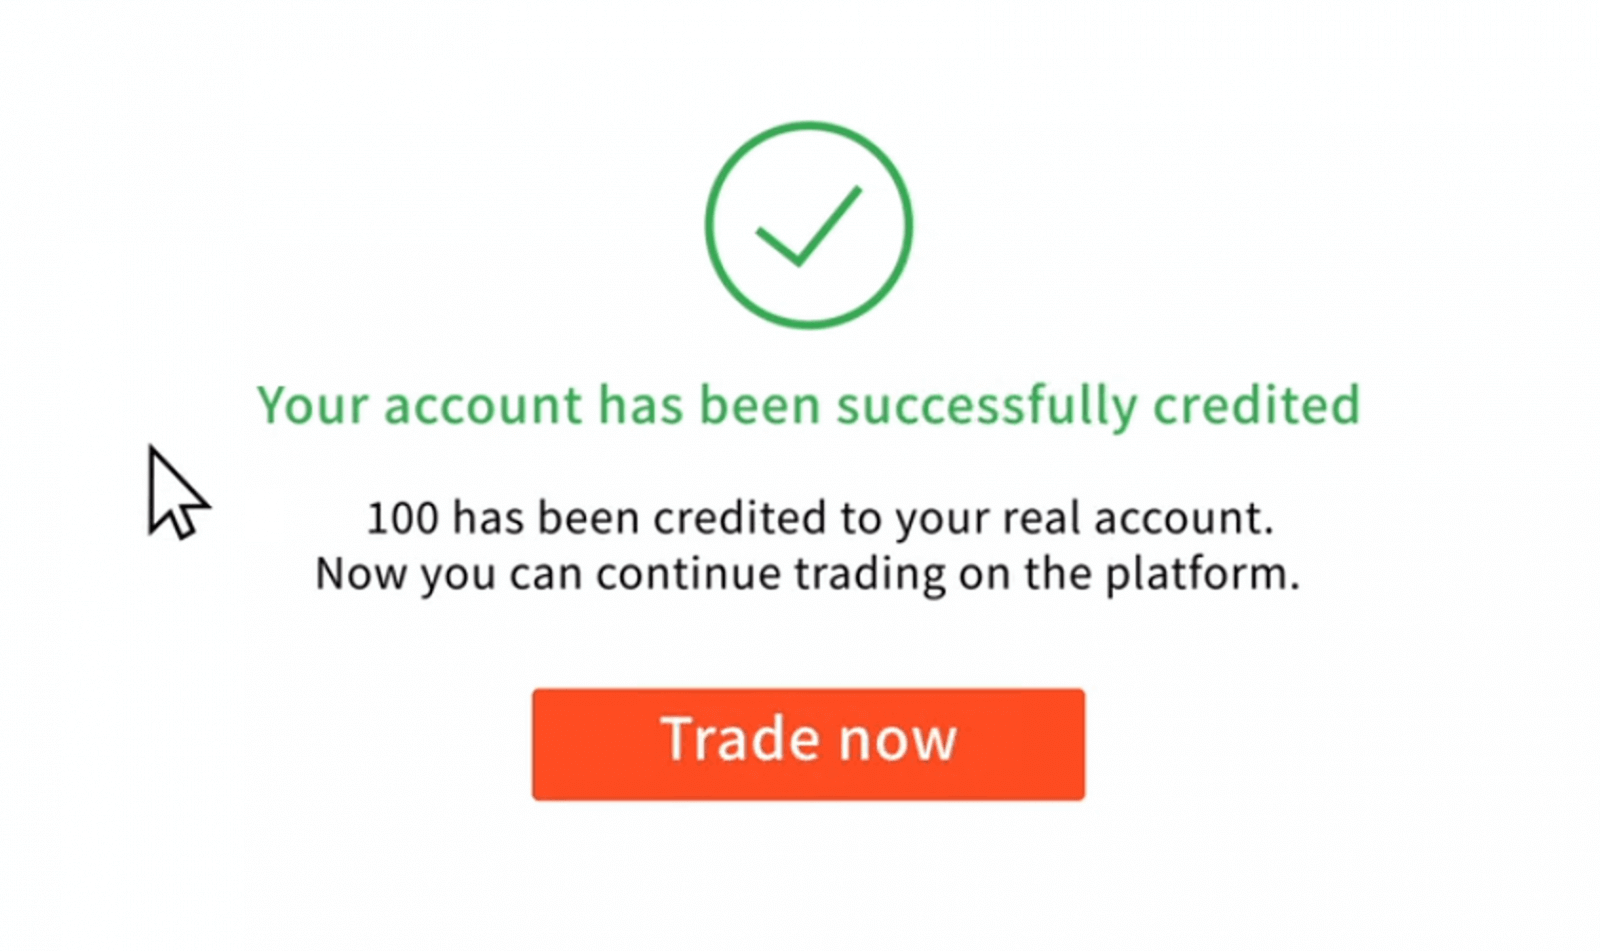 How to Withdraw and Make a Deposit Money on IQ Option